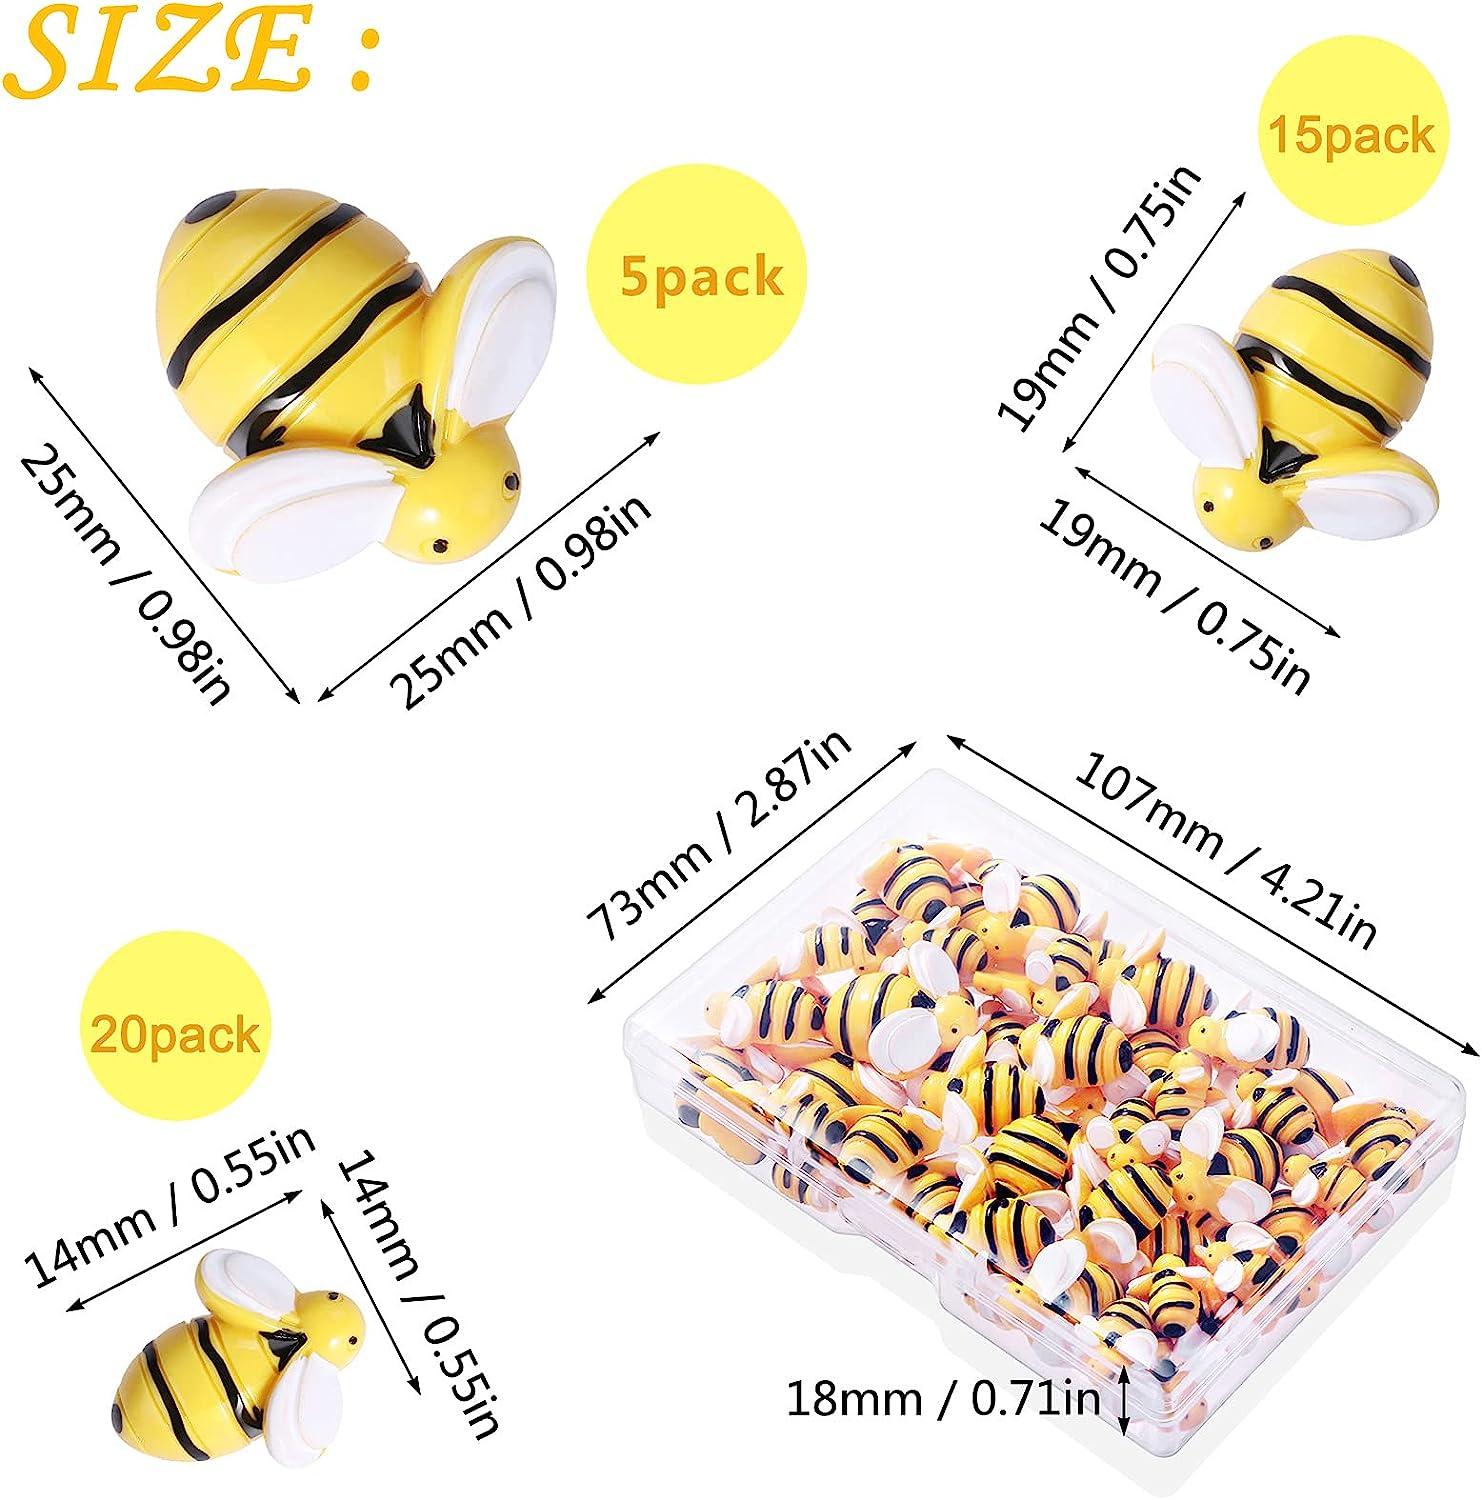 MIKIMIQI 40 Pcs Tiny Resin Bees Decor Bumble Bee Embellishment Resin Bees  Craft Decorations with Storage Box for DIY Craft Wreath Scrapbooking Party Home  Decor 0.98 in 0.74 in 0.55 in